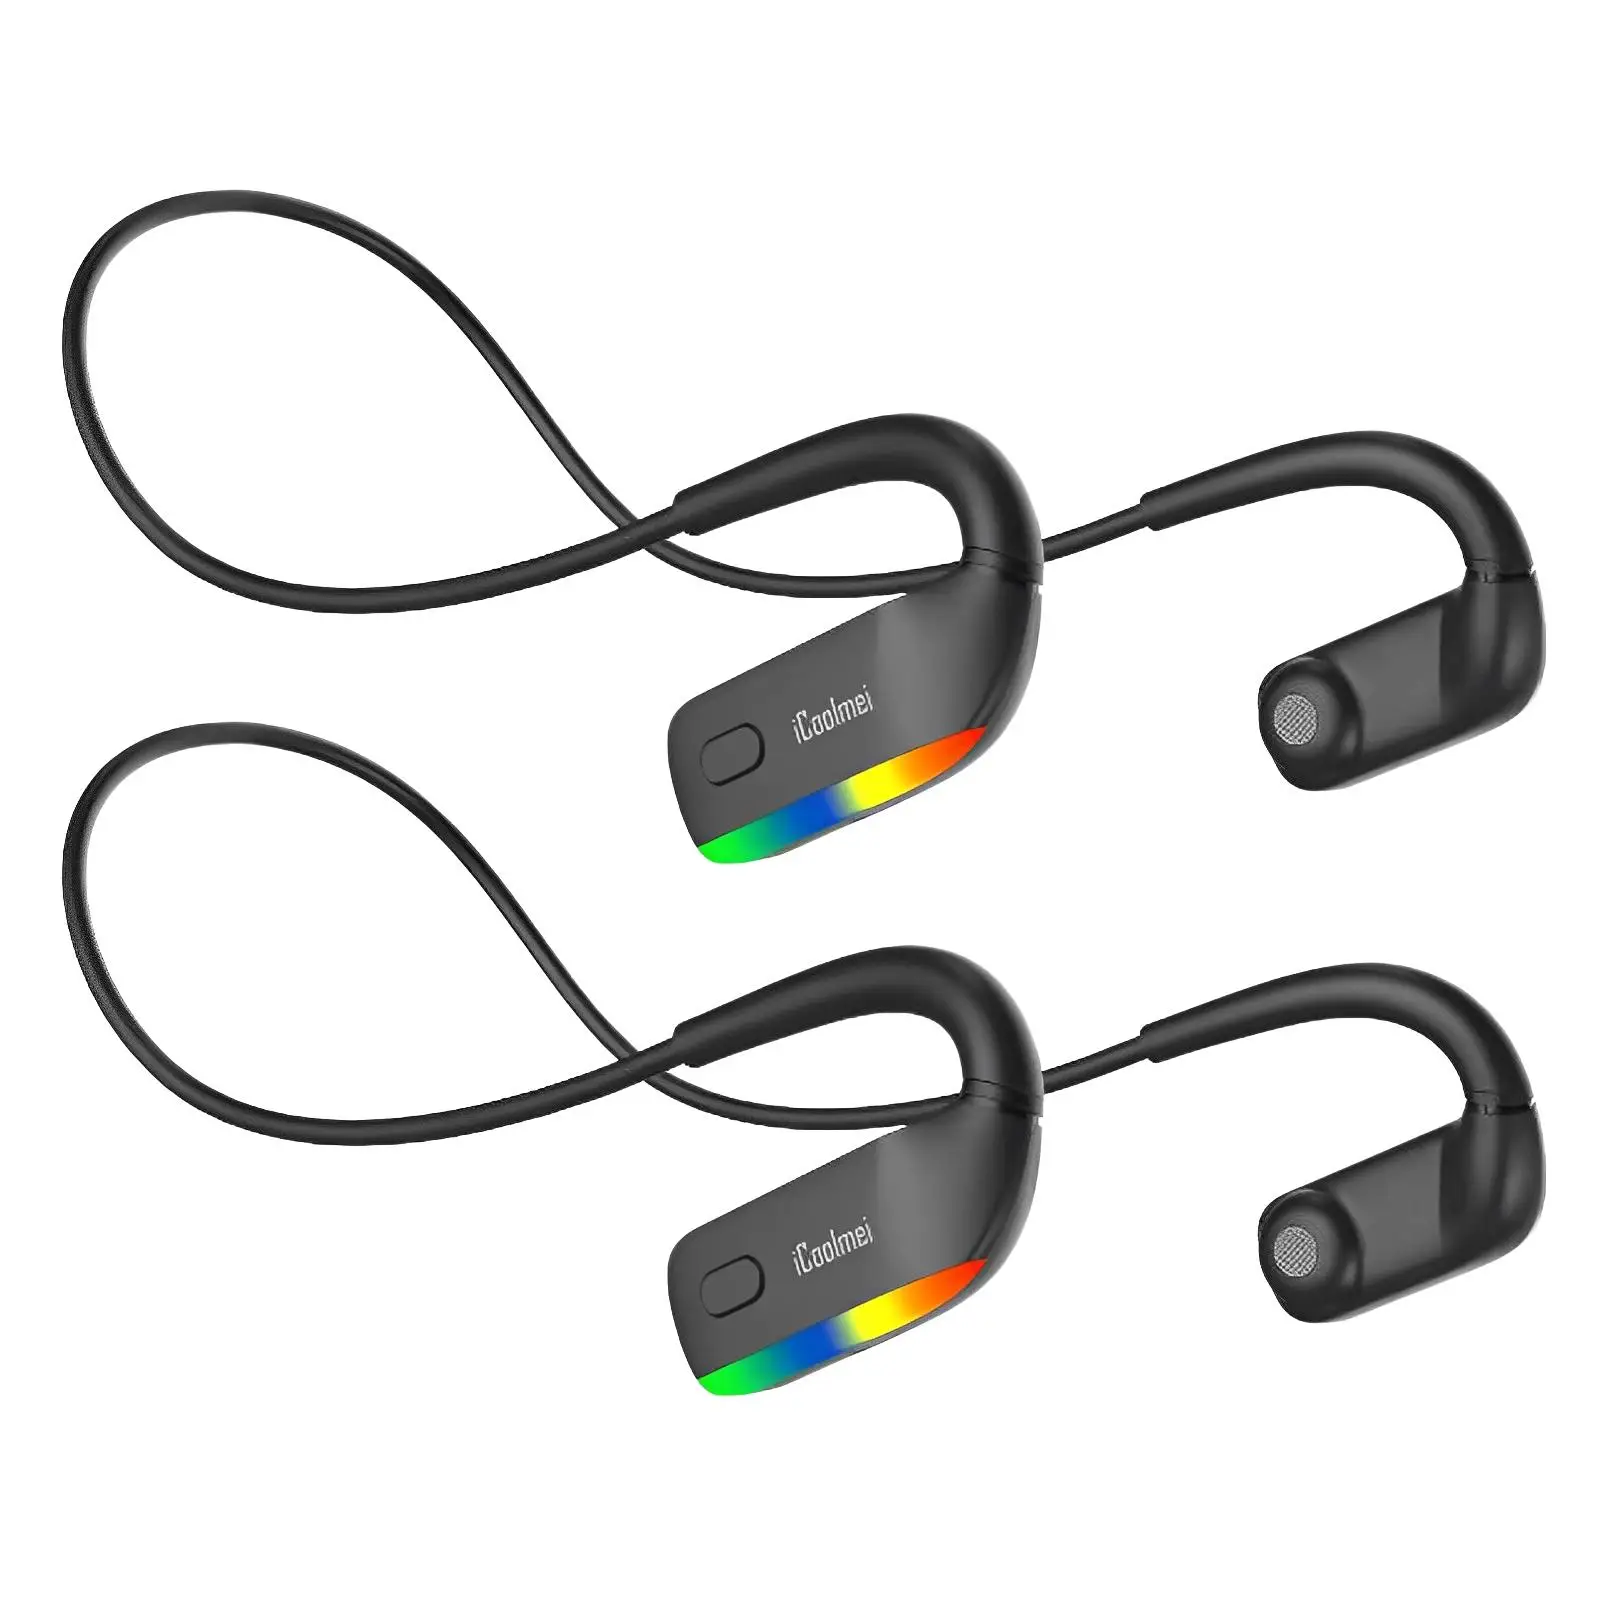 conduction Headphones Stereo open Ear IPX7 Waterproof Sport Bluetooth Headset for Running Gym Cycling Hiking Walking